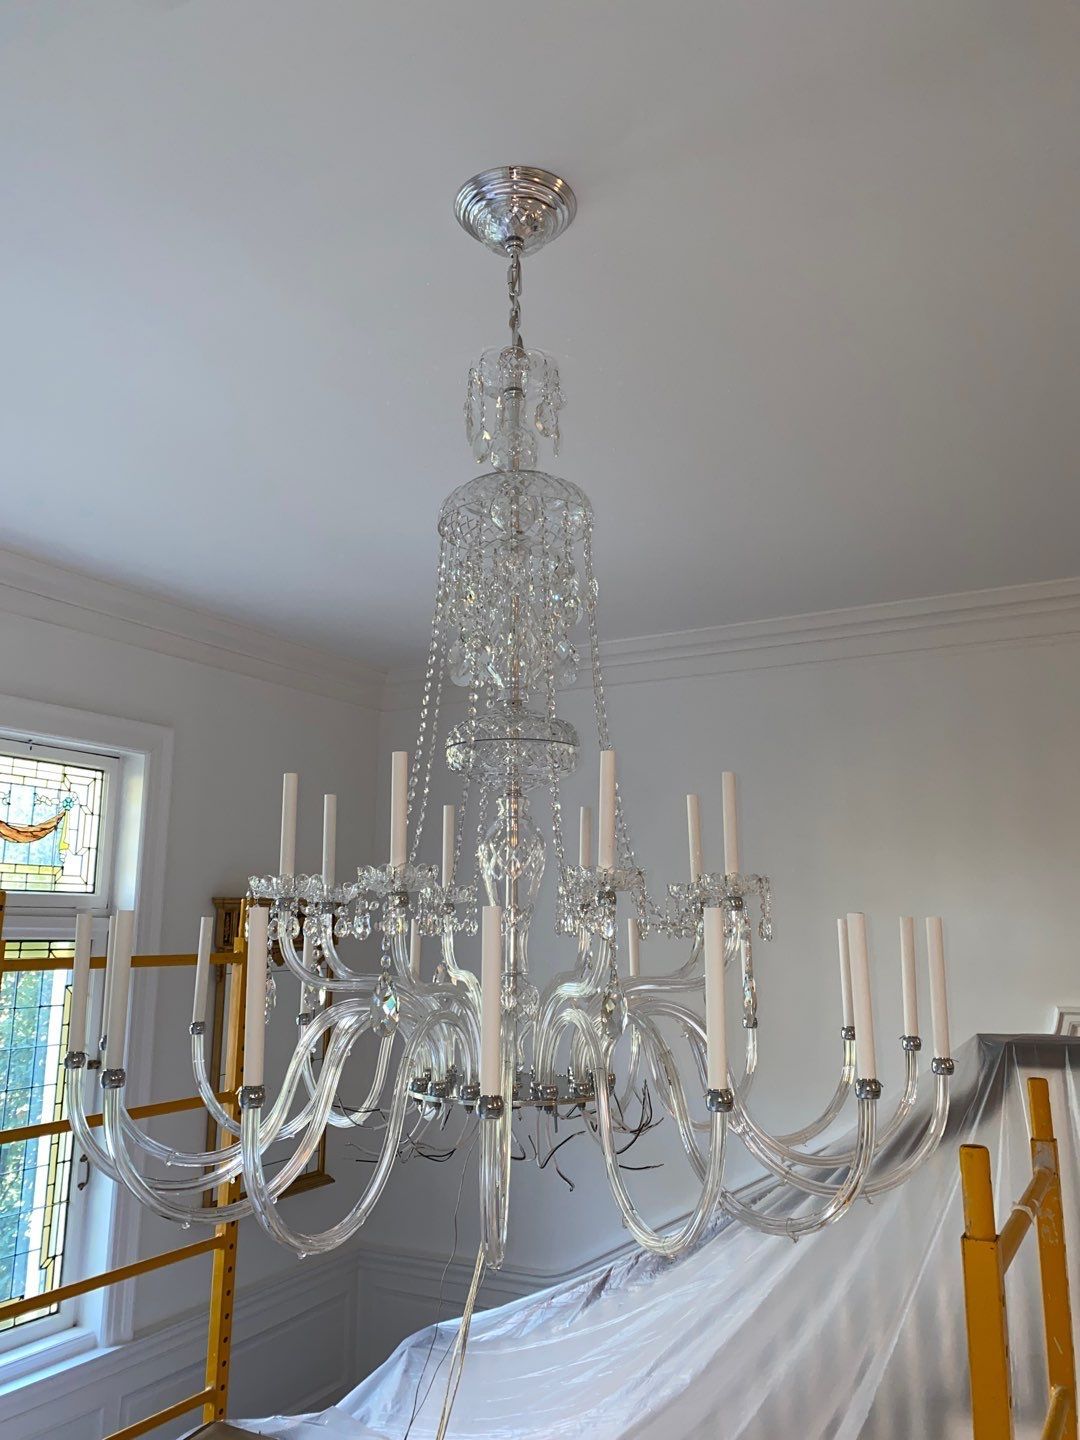 chandelier-and-lighting-installation-project-in-kansas-city-mo v16